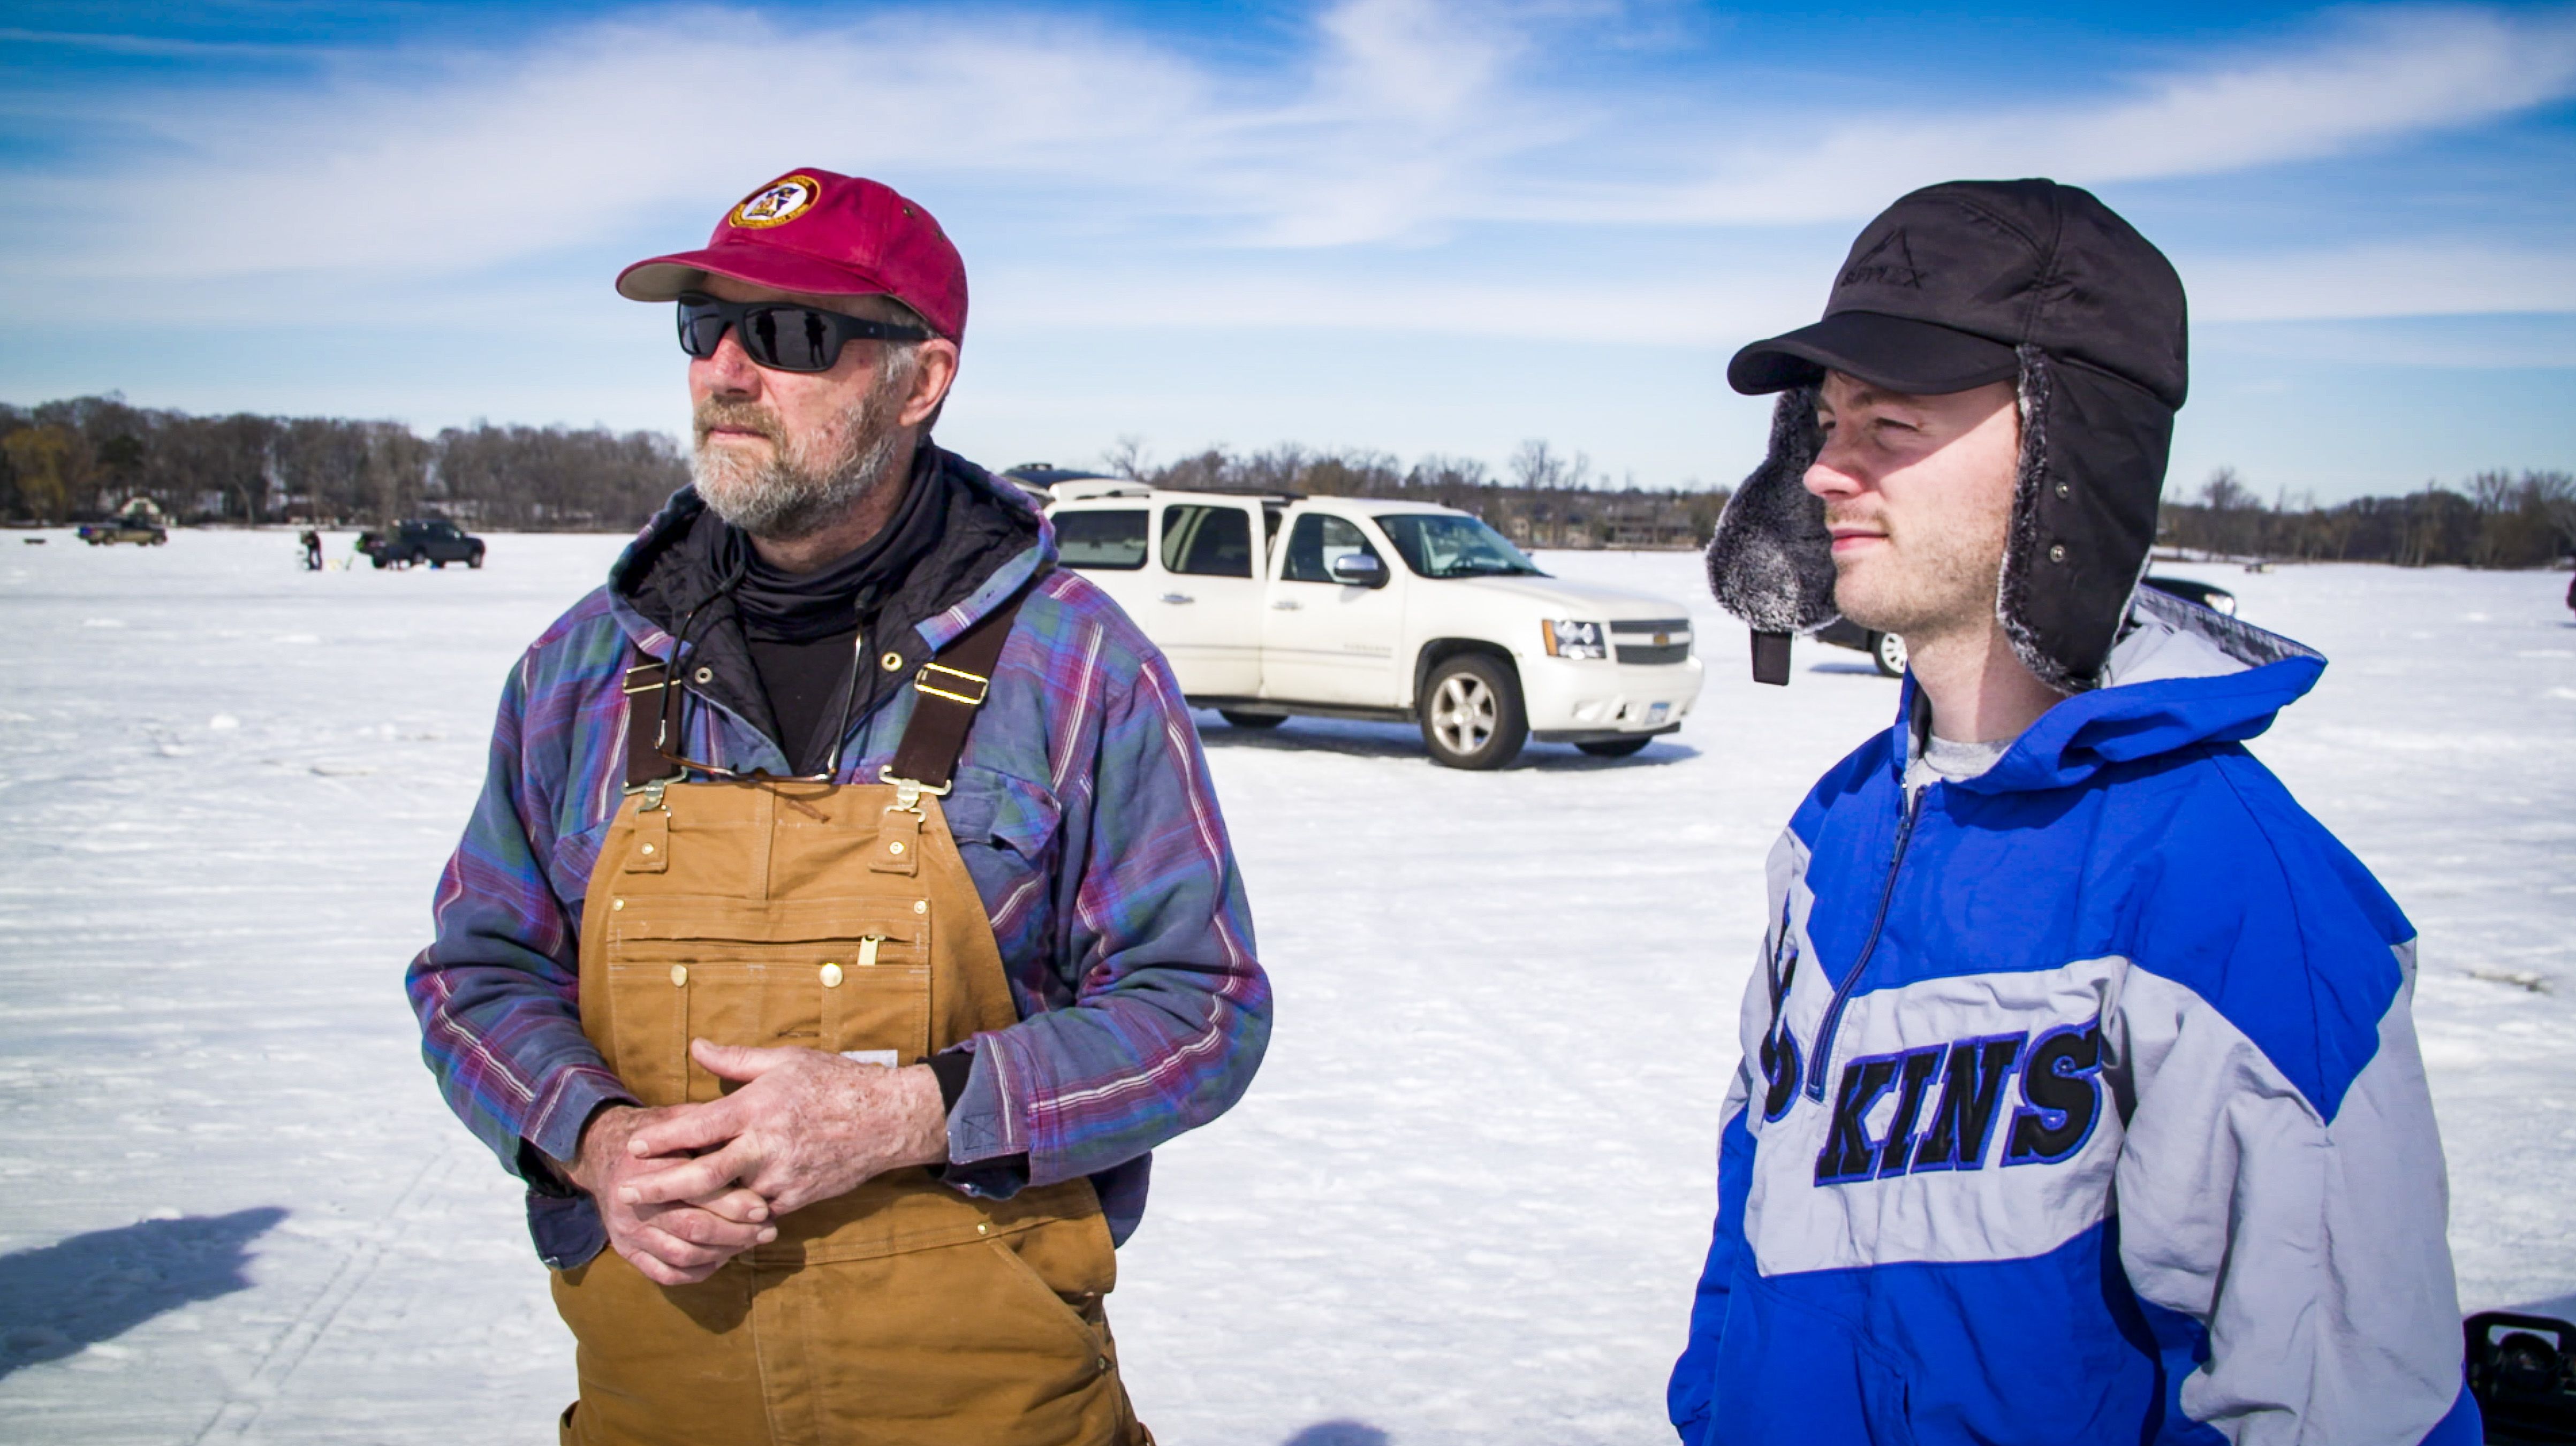 Minnesota Couple Shocked By What Popped Up While Ice Fishing